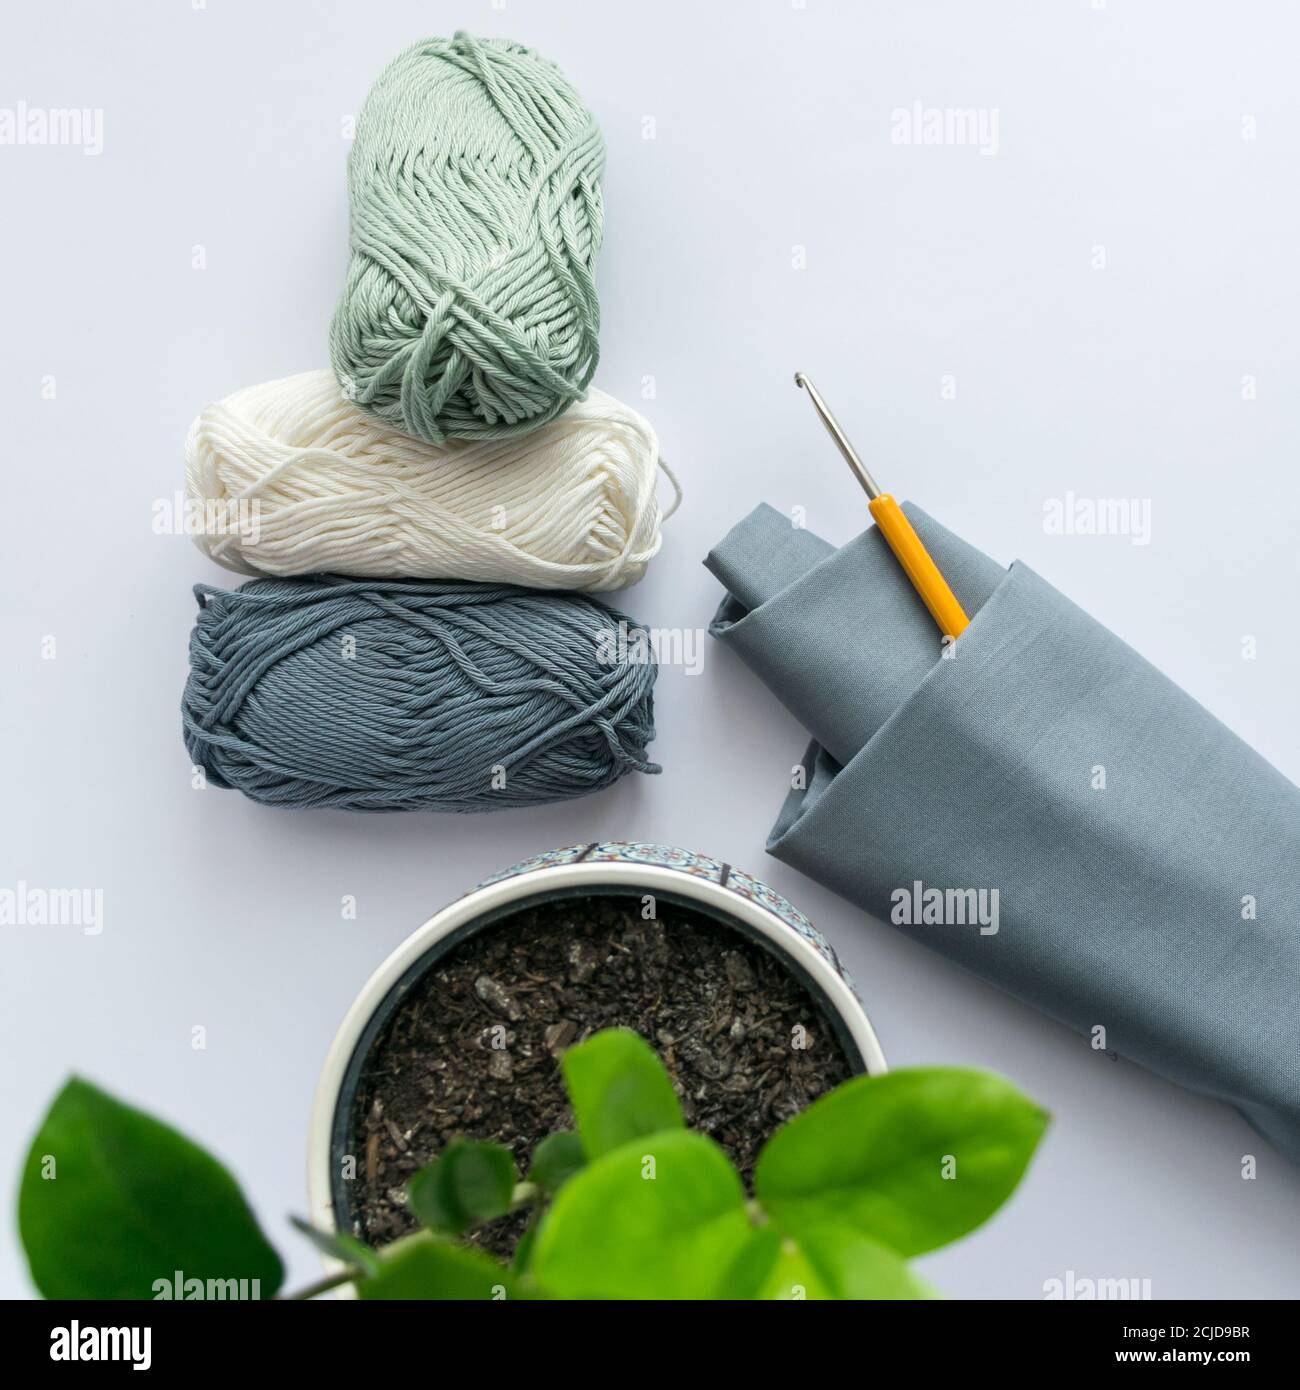 Three Pastel colored Balls of Yarn with crochet hook and cotton fabric, flat lay Stock Photo